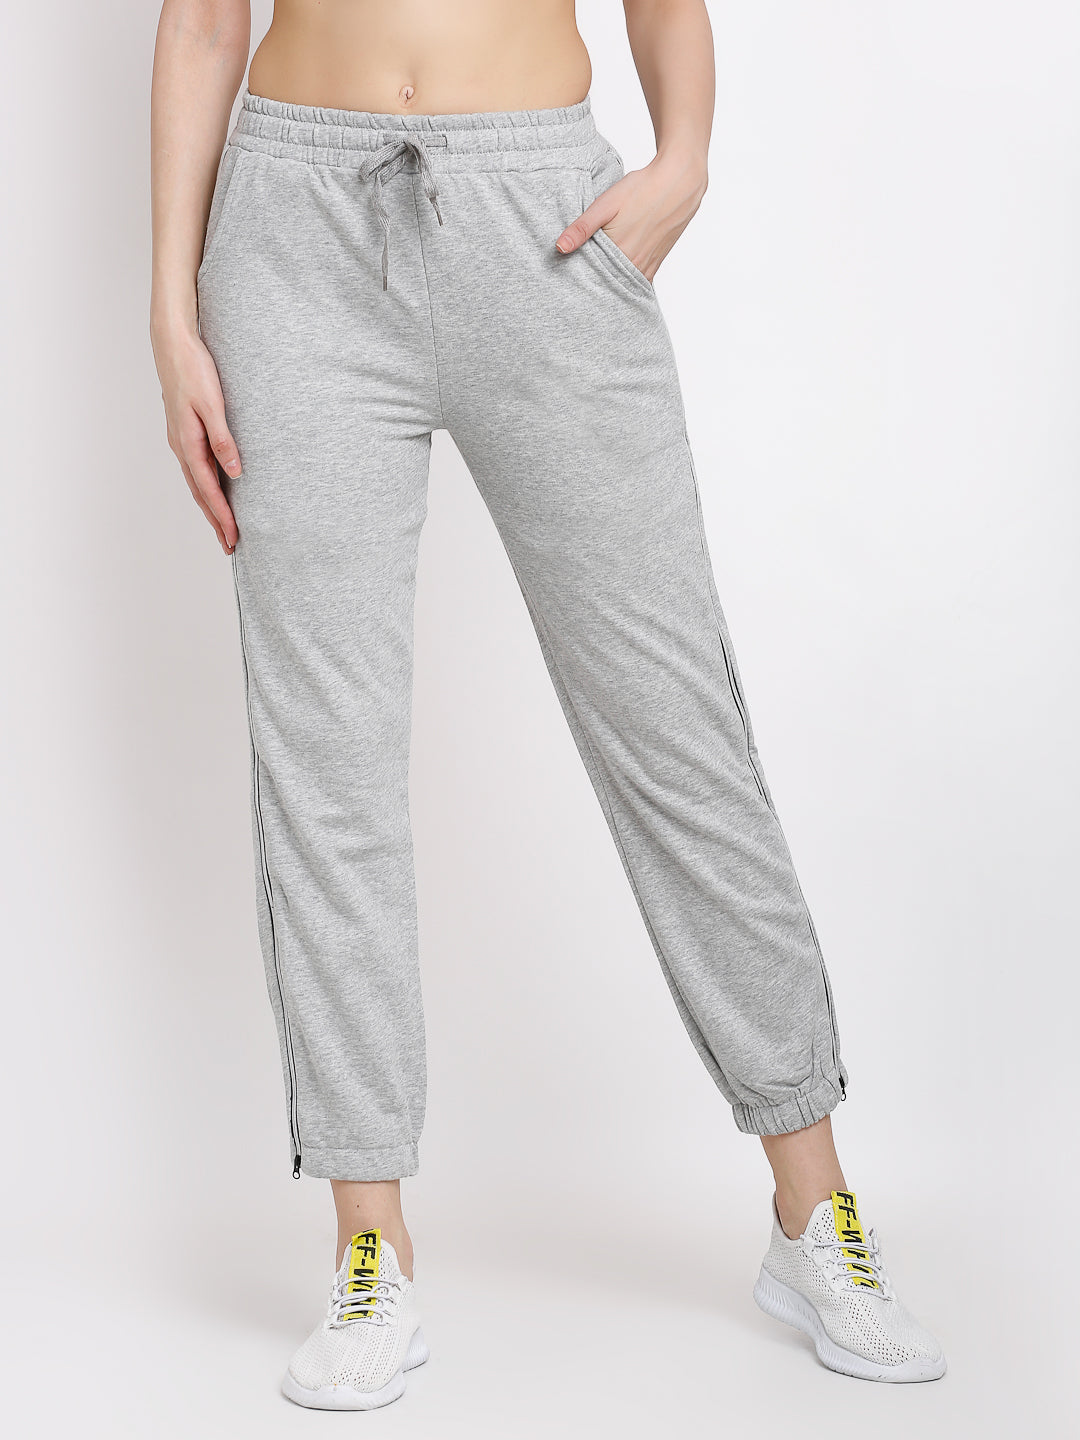 Buy Women Grey Straight Fit Ankle-Length Sports Joggers - Global